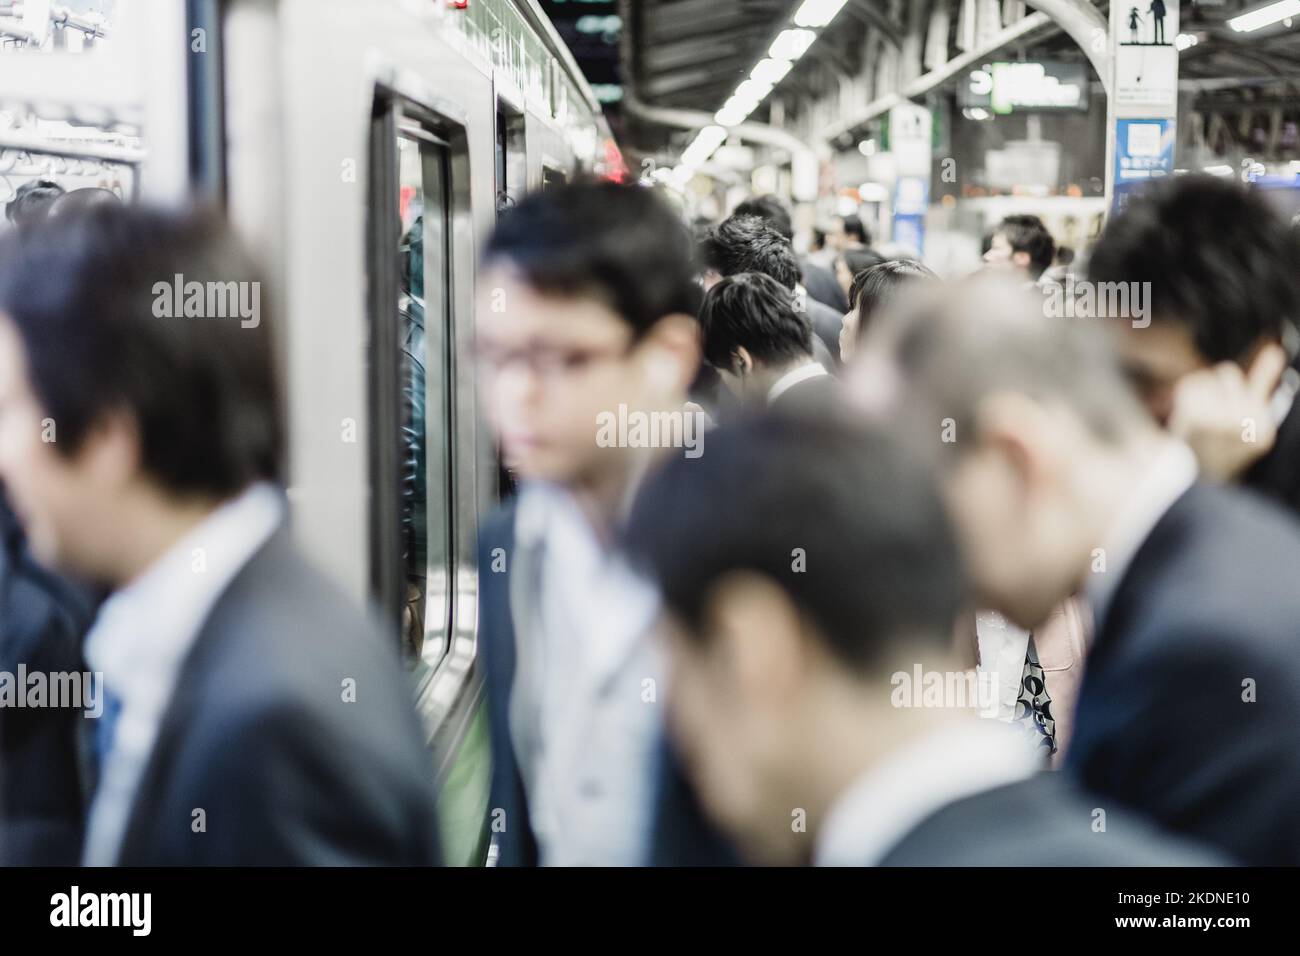 Corporate business people commuting to work by Tokyo public transport. Horizontal composition. Stock Photo